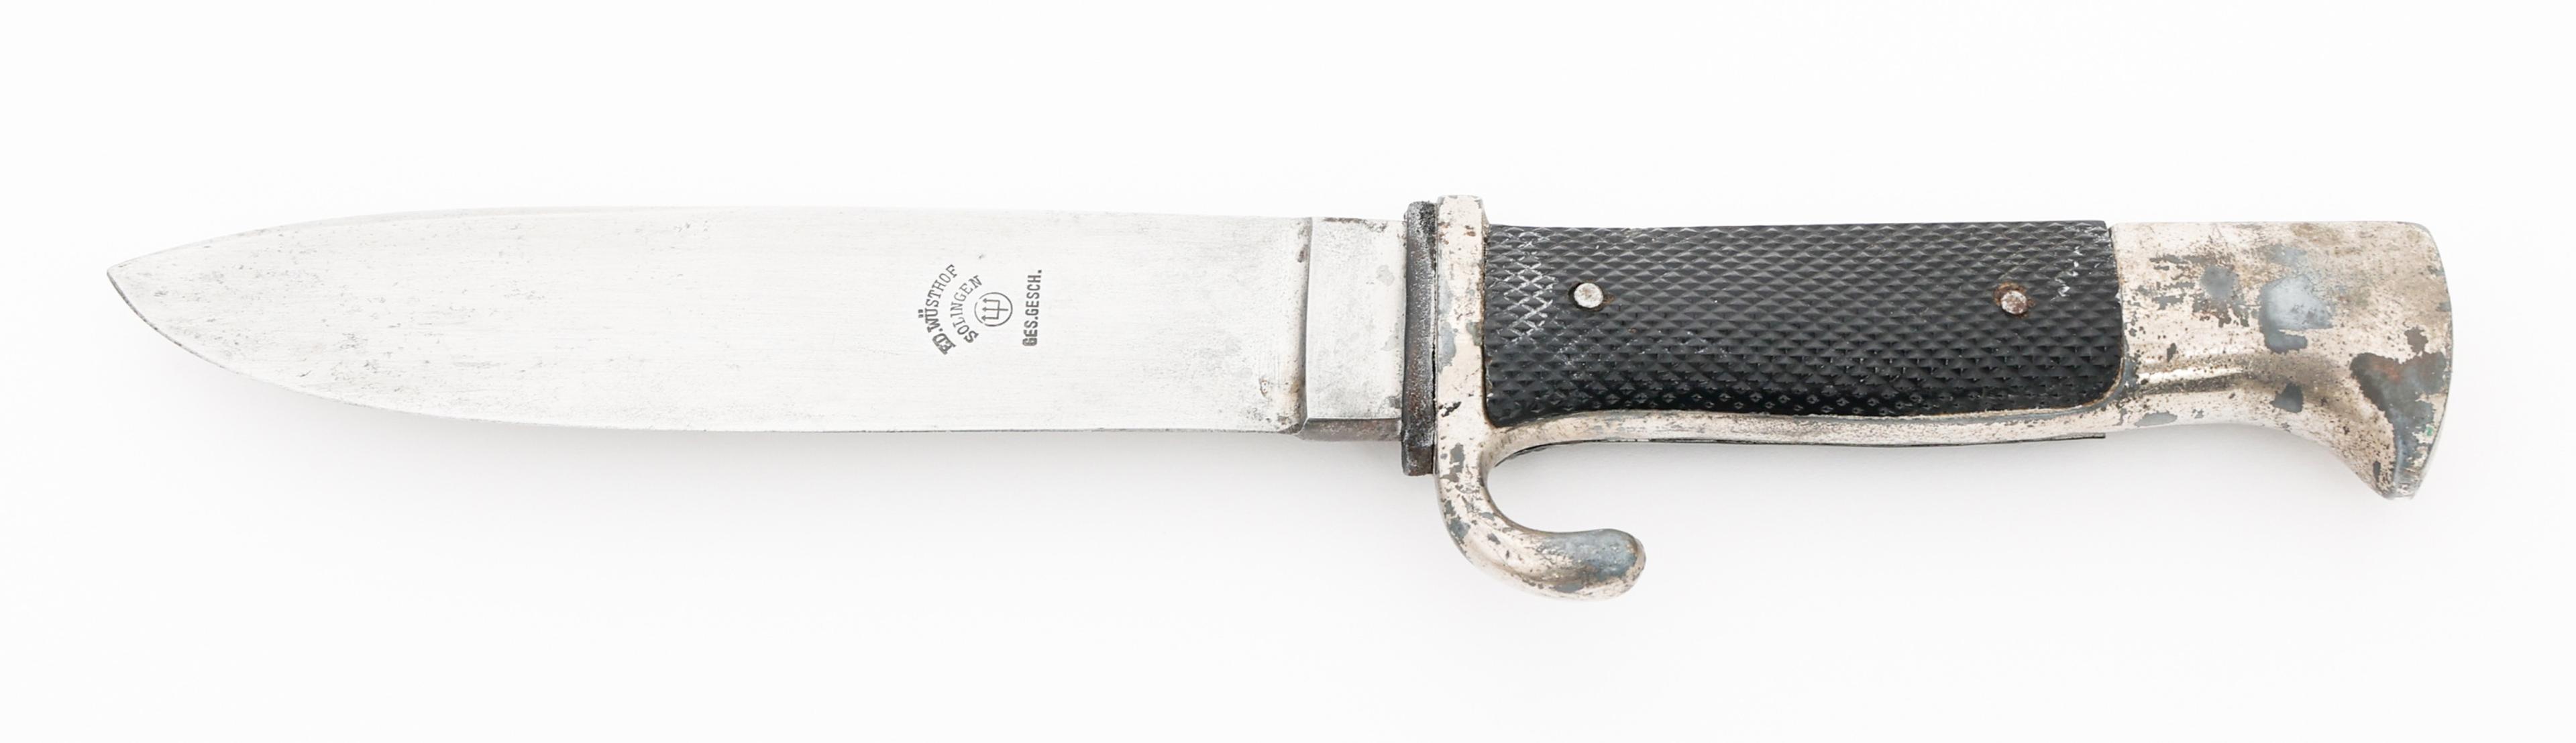 WWII GERMAN HITLER YOUTH KNIFE by ED WUSTHOF